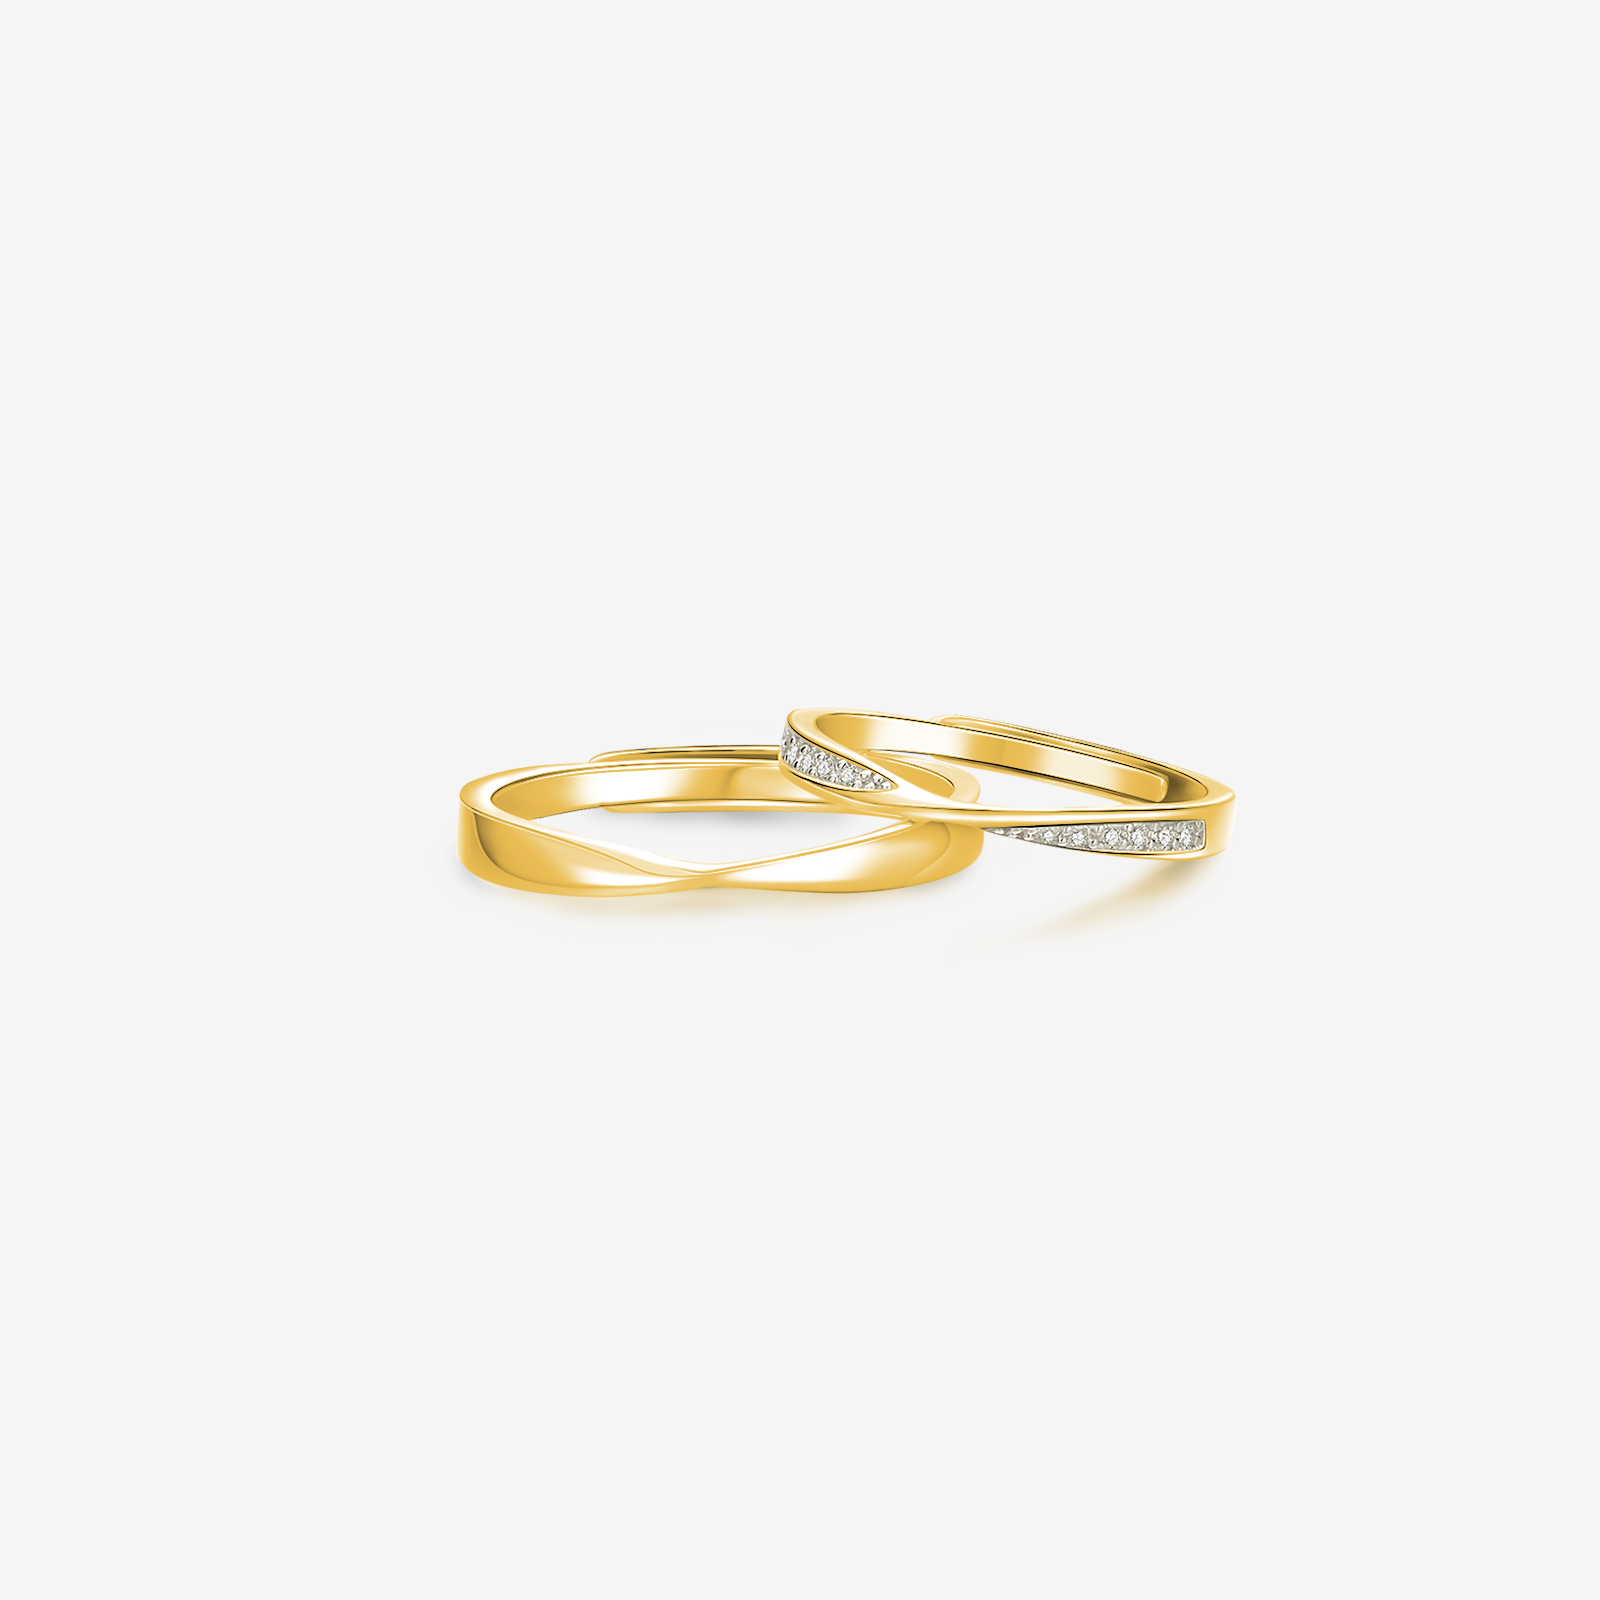 "Connected" Couples Band Sterling Silver Rings